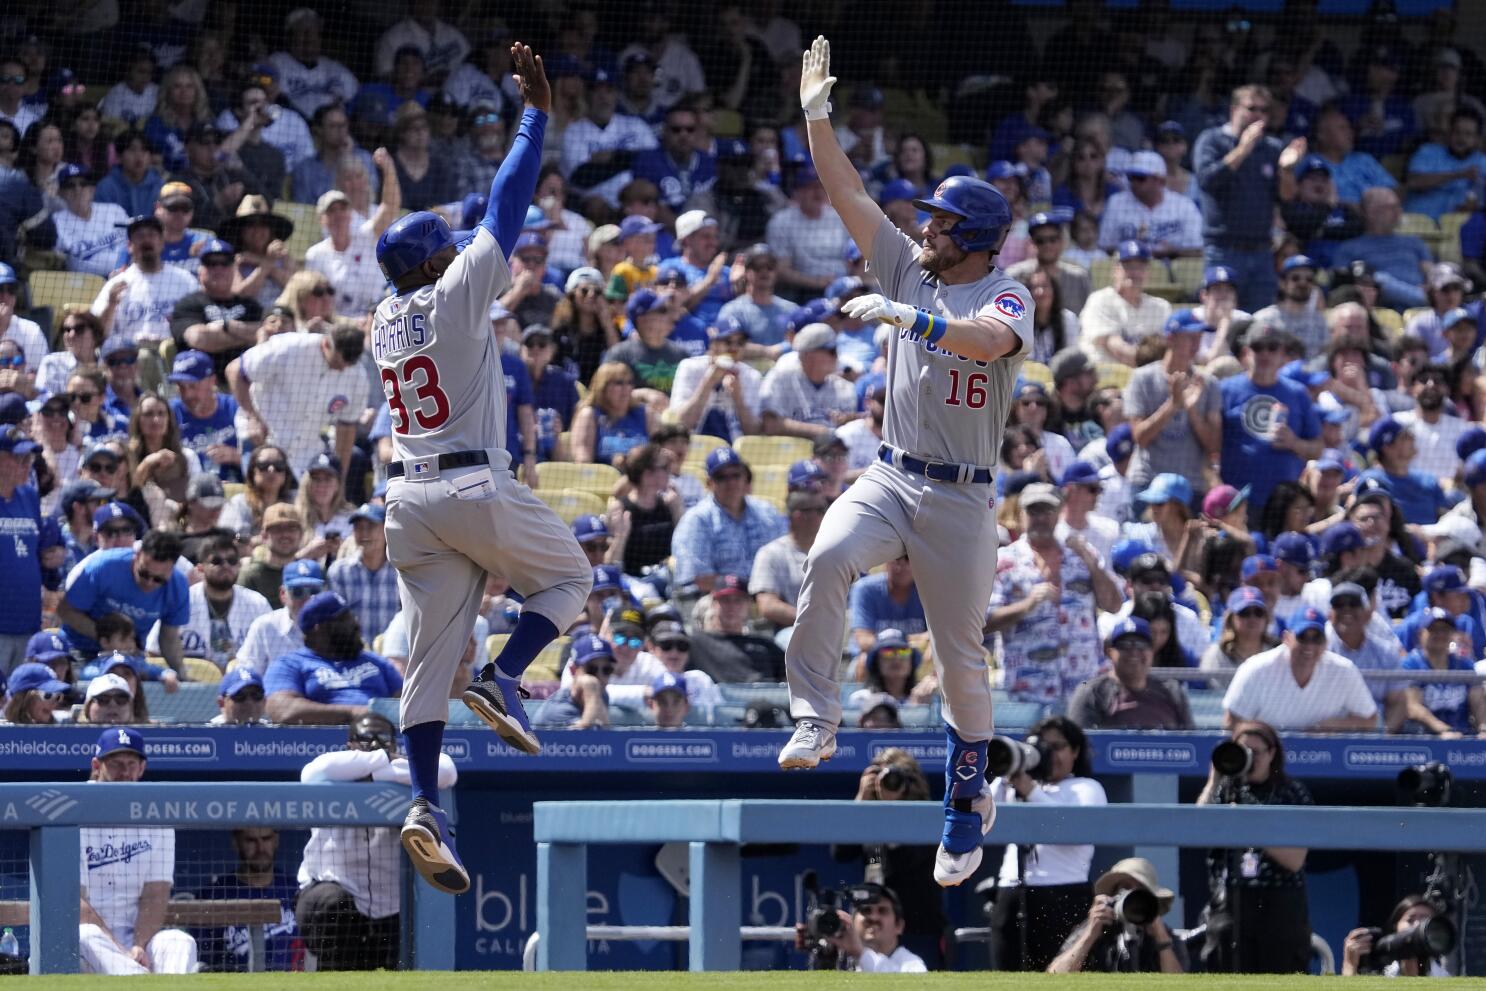 Wisdom, Bellinger HRs lift Cubs to 3-2 win over Dodgers - The San